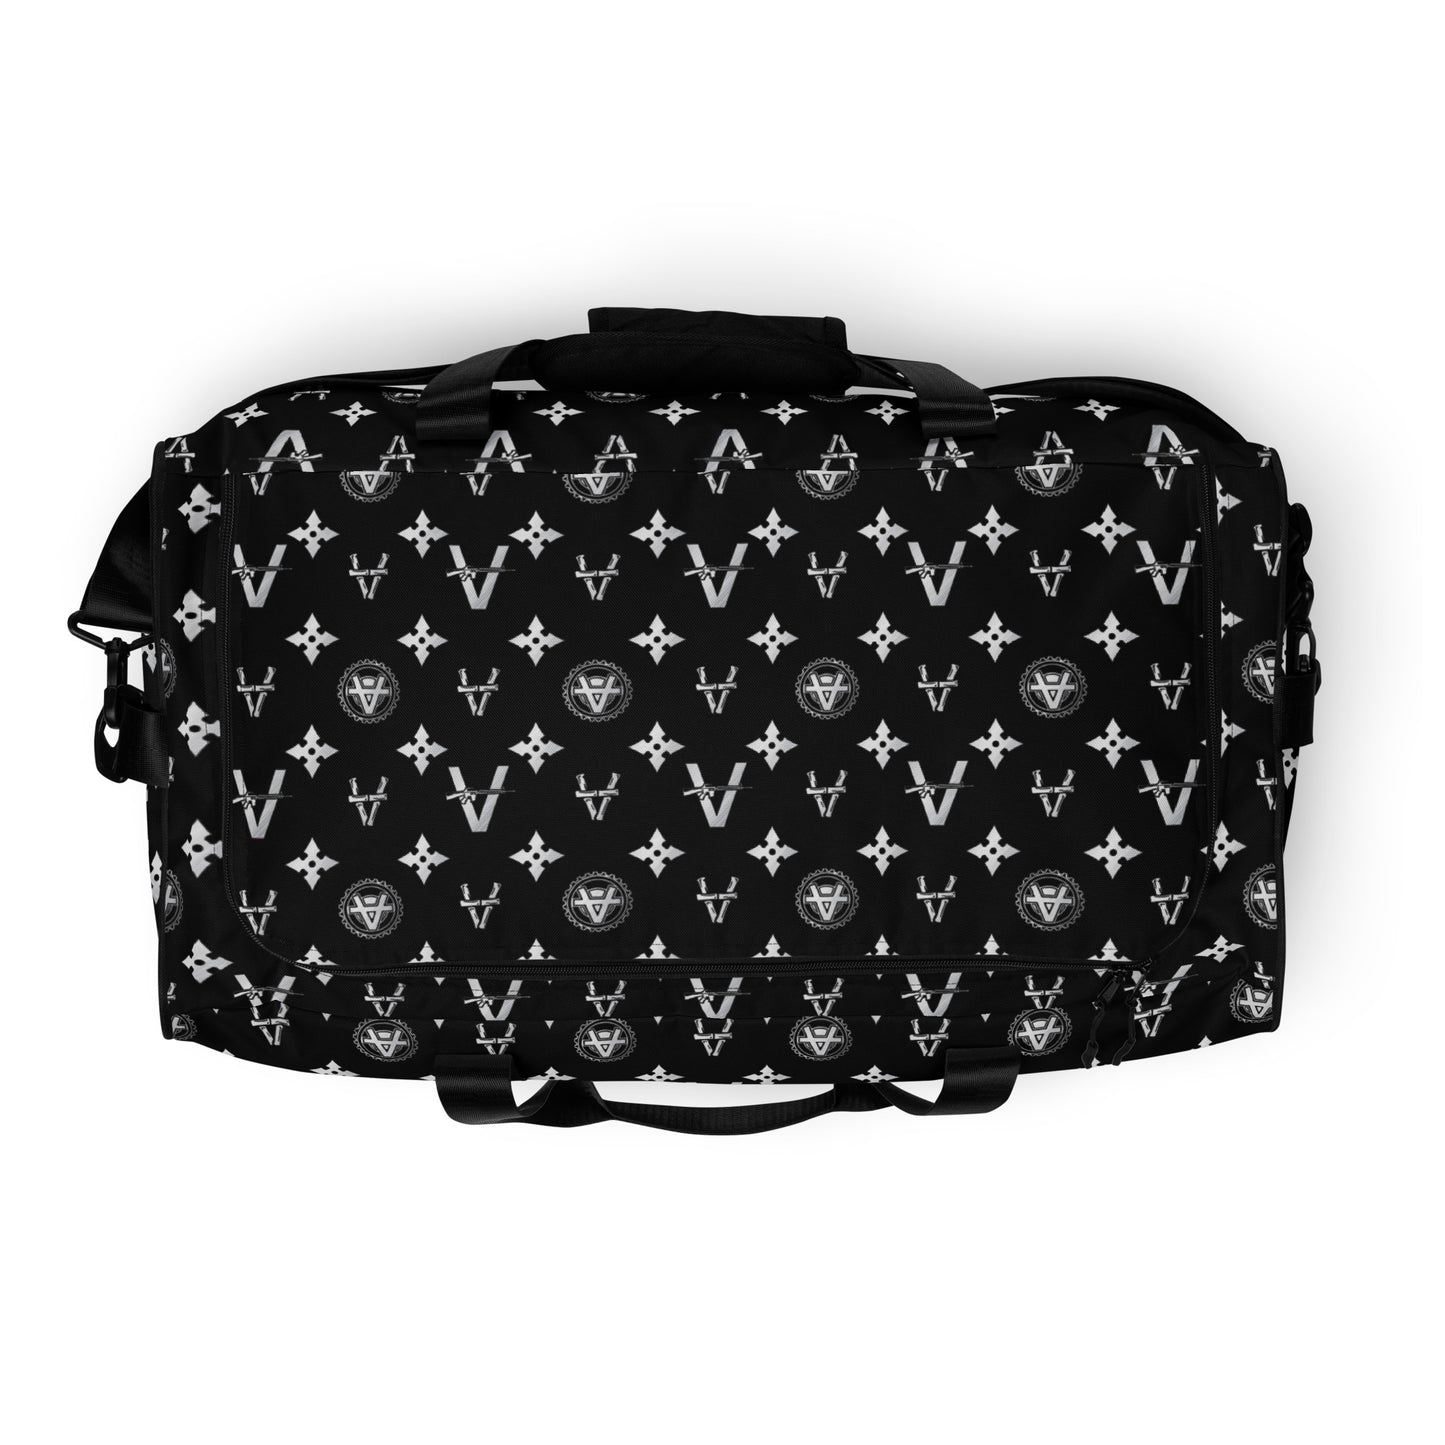 Vandals Silver and Black Duffle bag by Sergio Giorgini